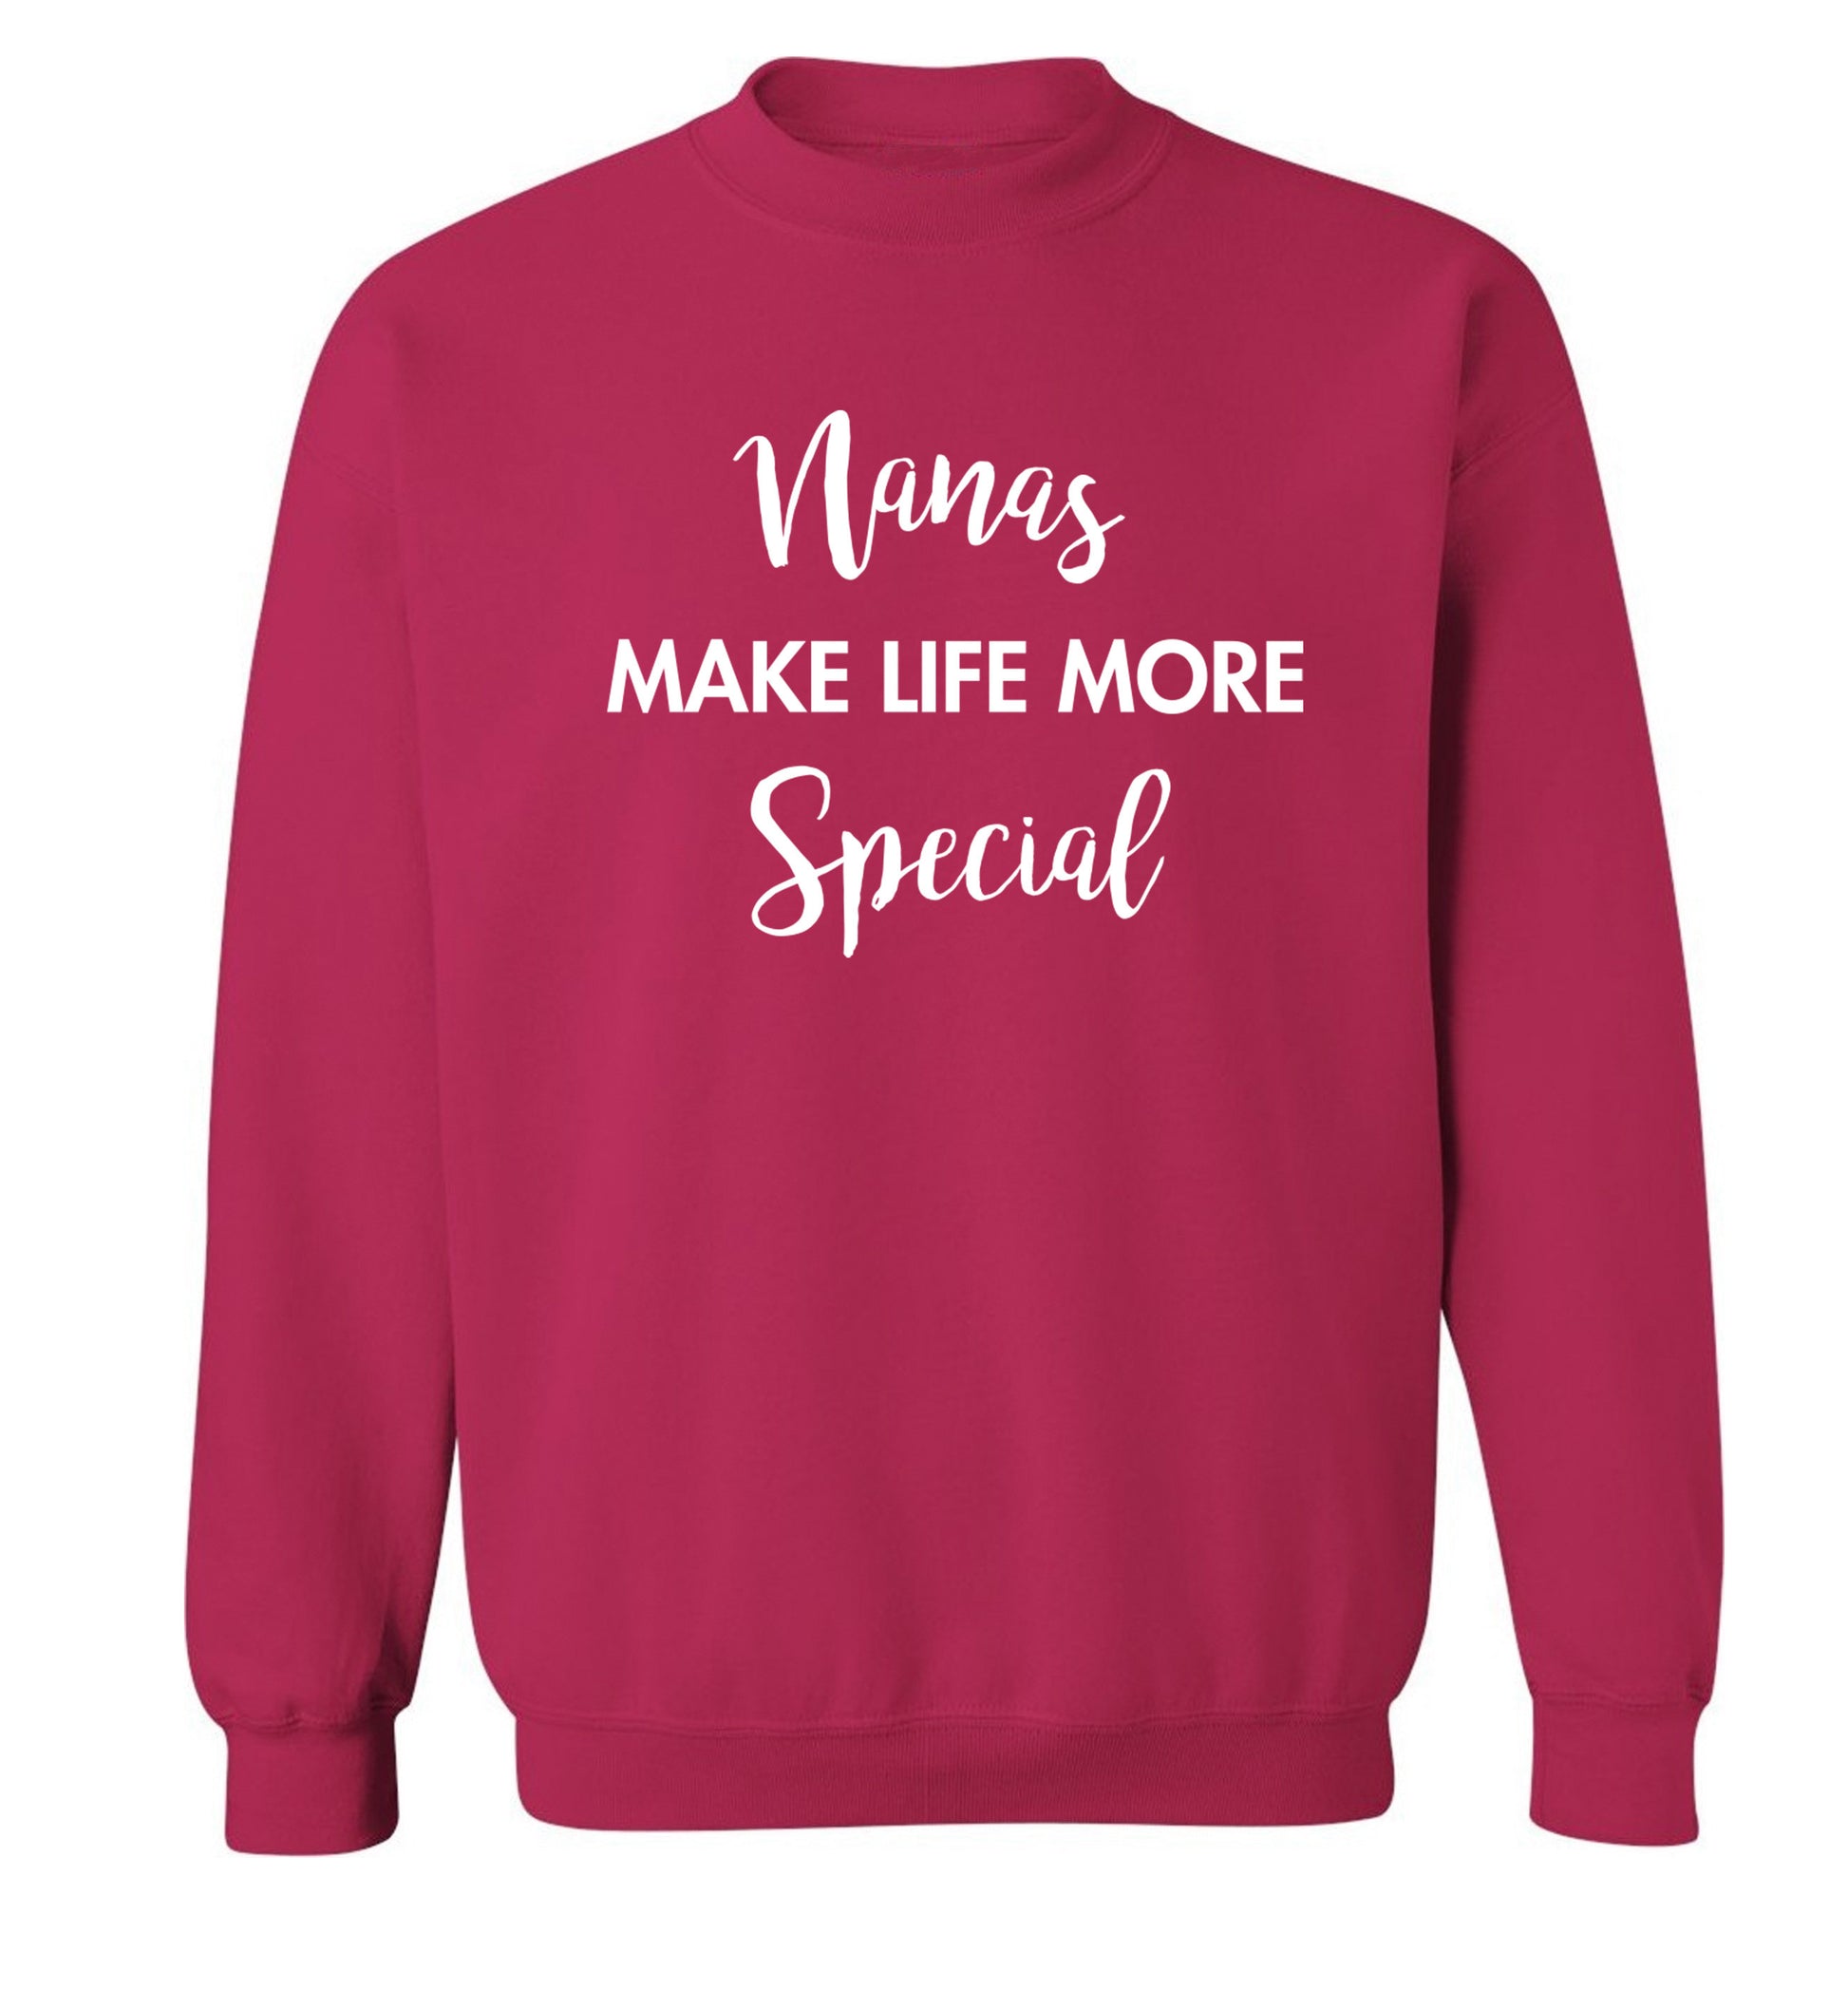 Nanas make life more special Adult's unisex pink Sweater 2XL